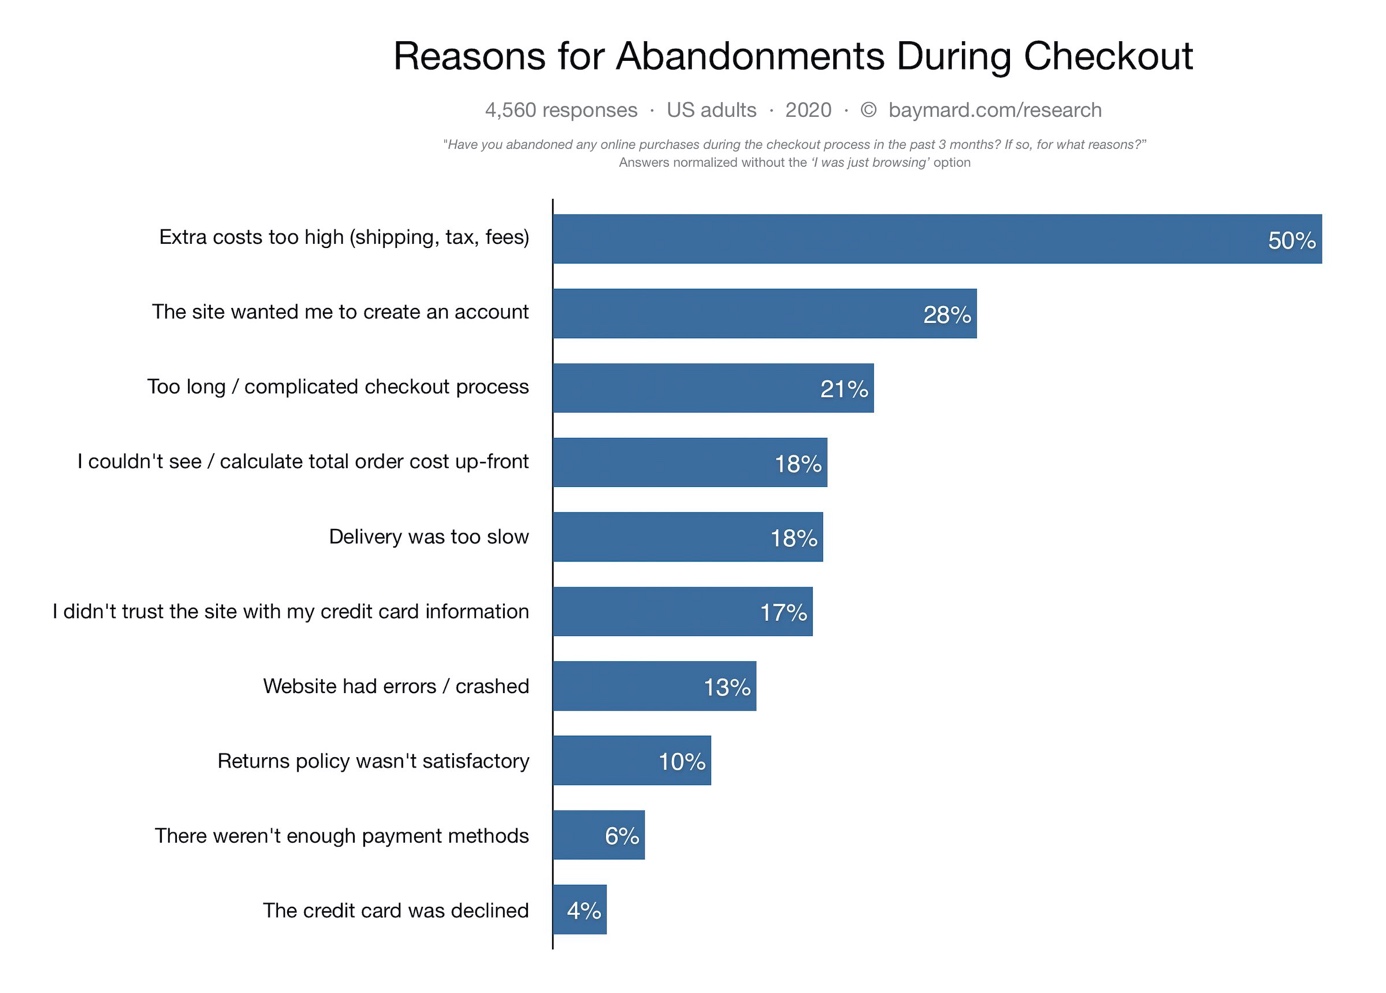 Reasons for abandonment  during checkout chart